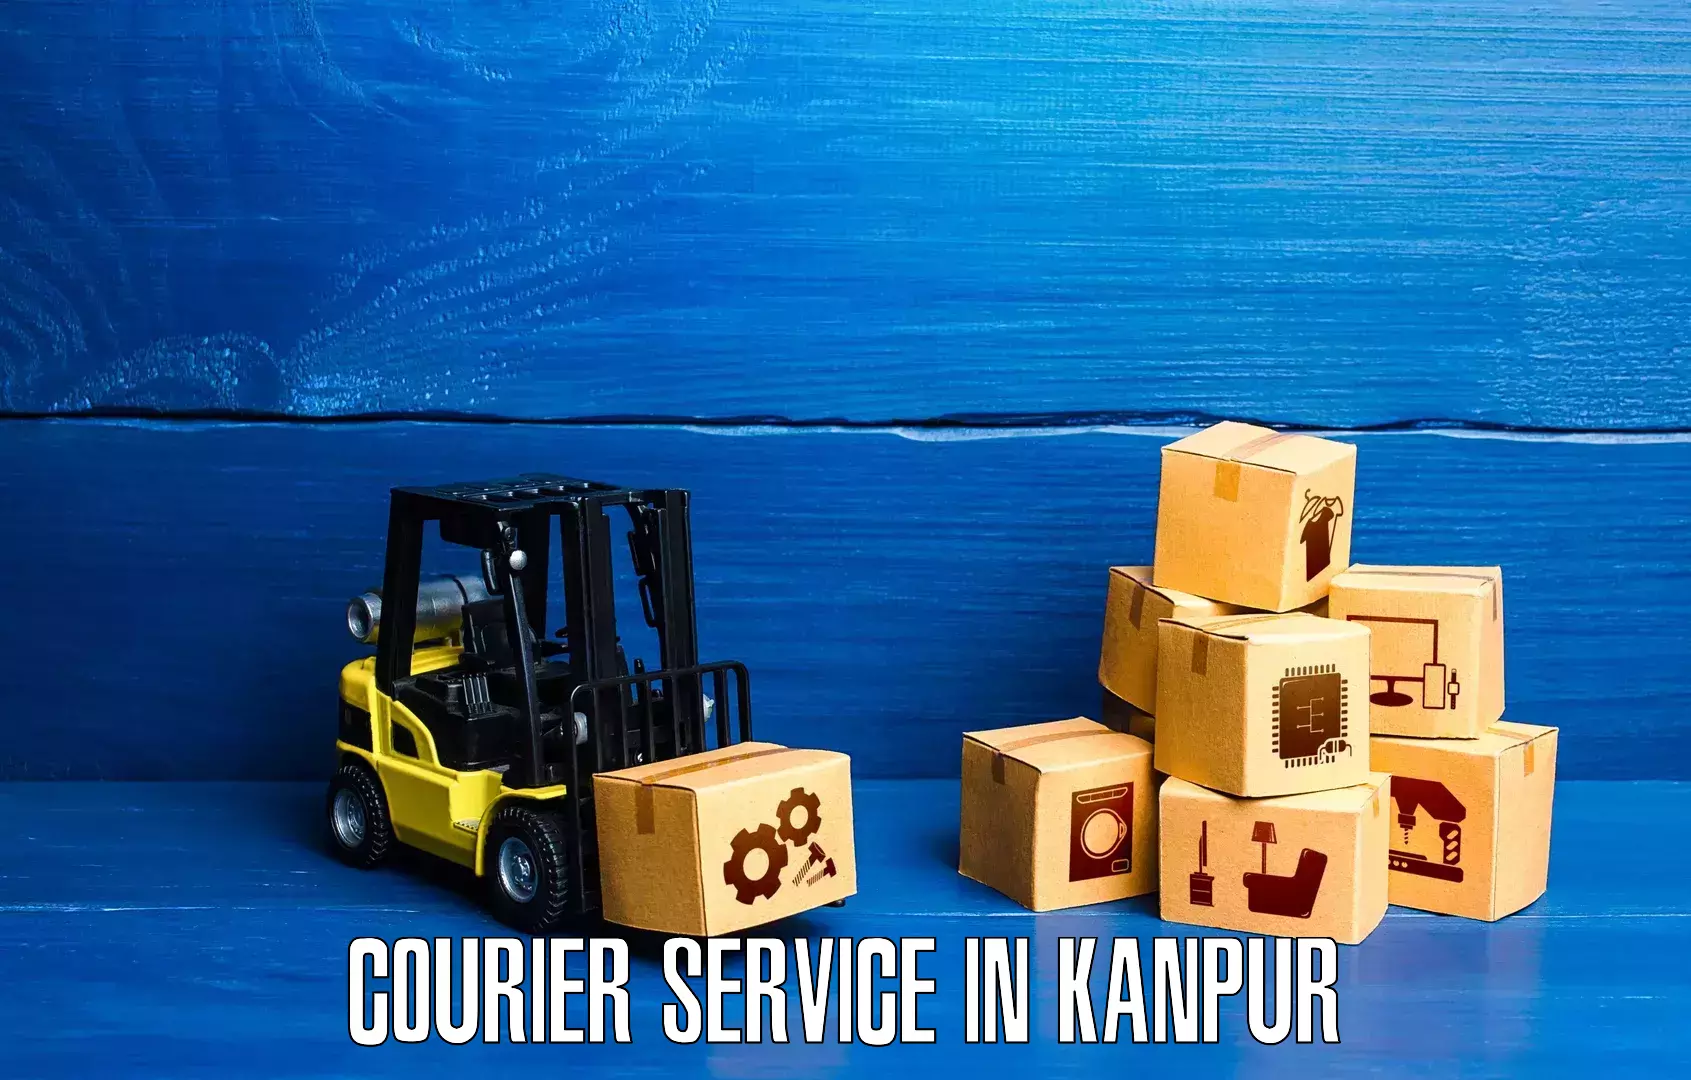 Comprehensive delivery network in Kanpur